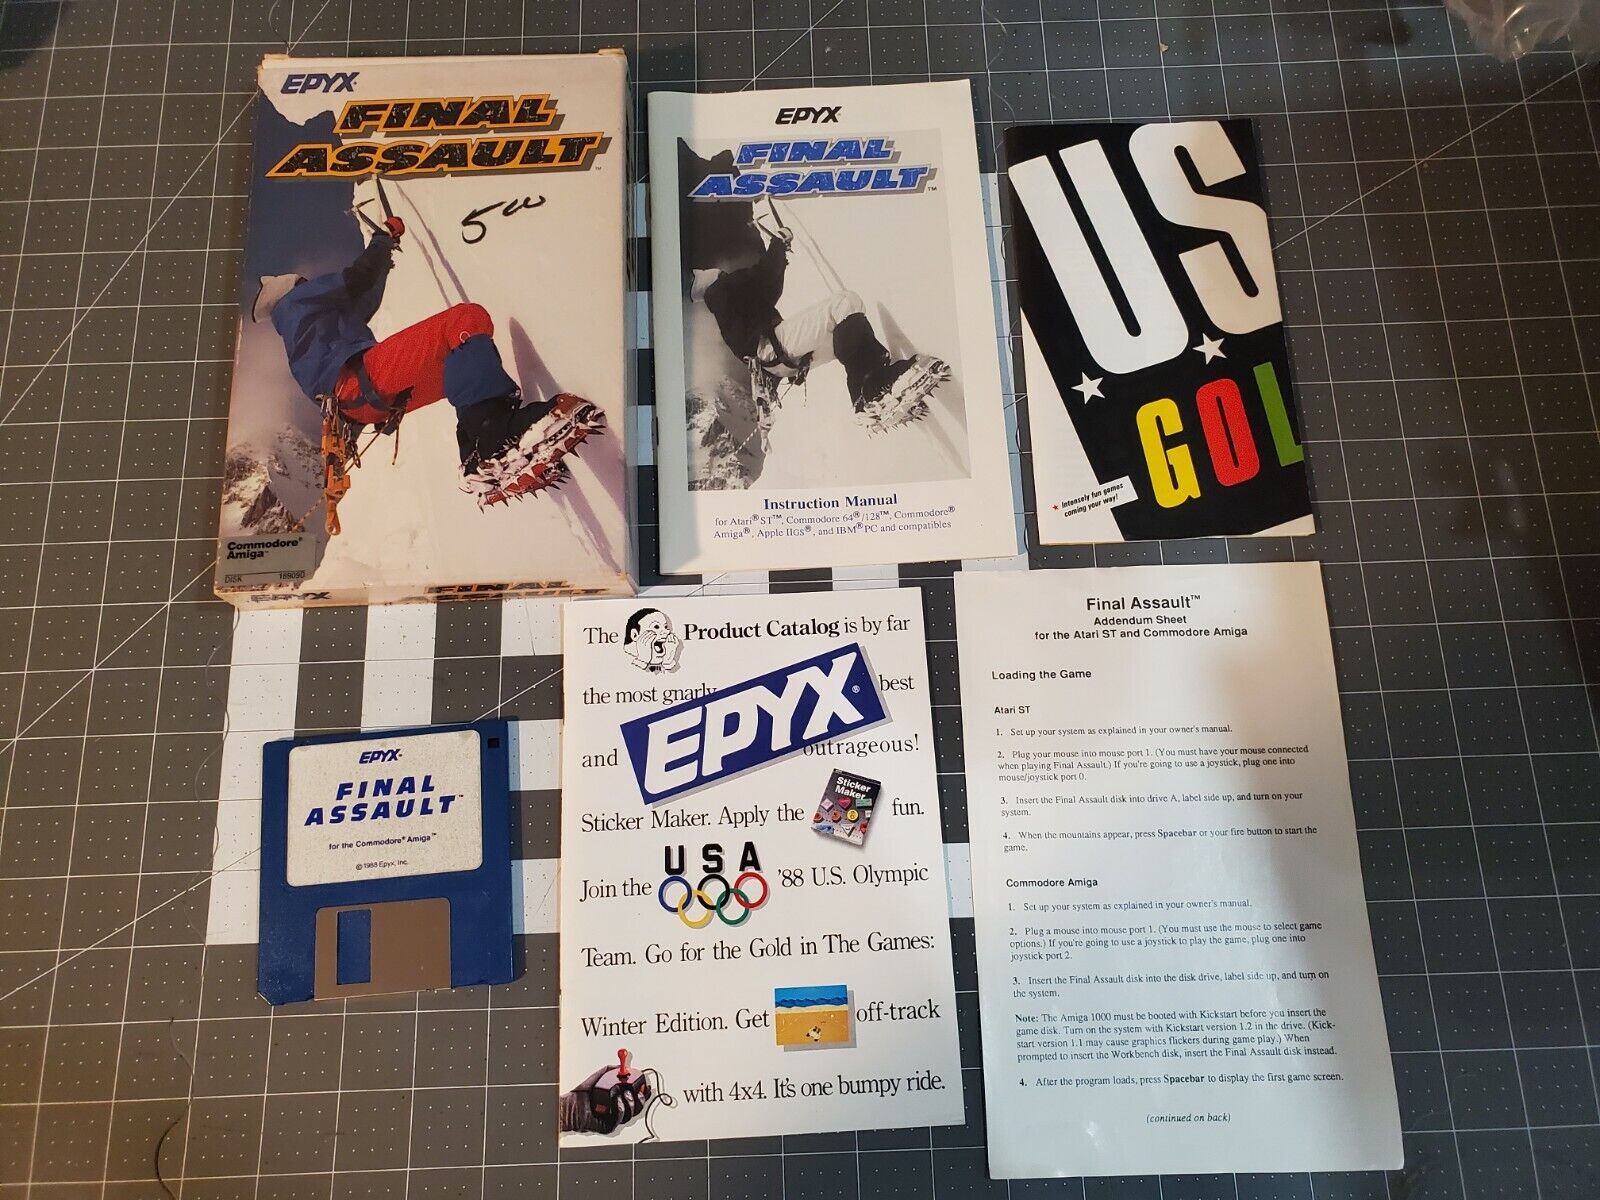 1988 Final Assault EPYX Game for Commodore Amiga 3.5 Diskette with Instructions